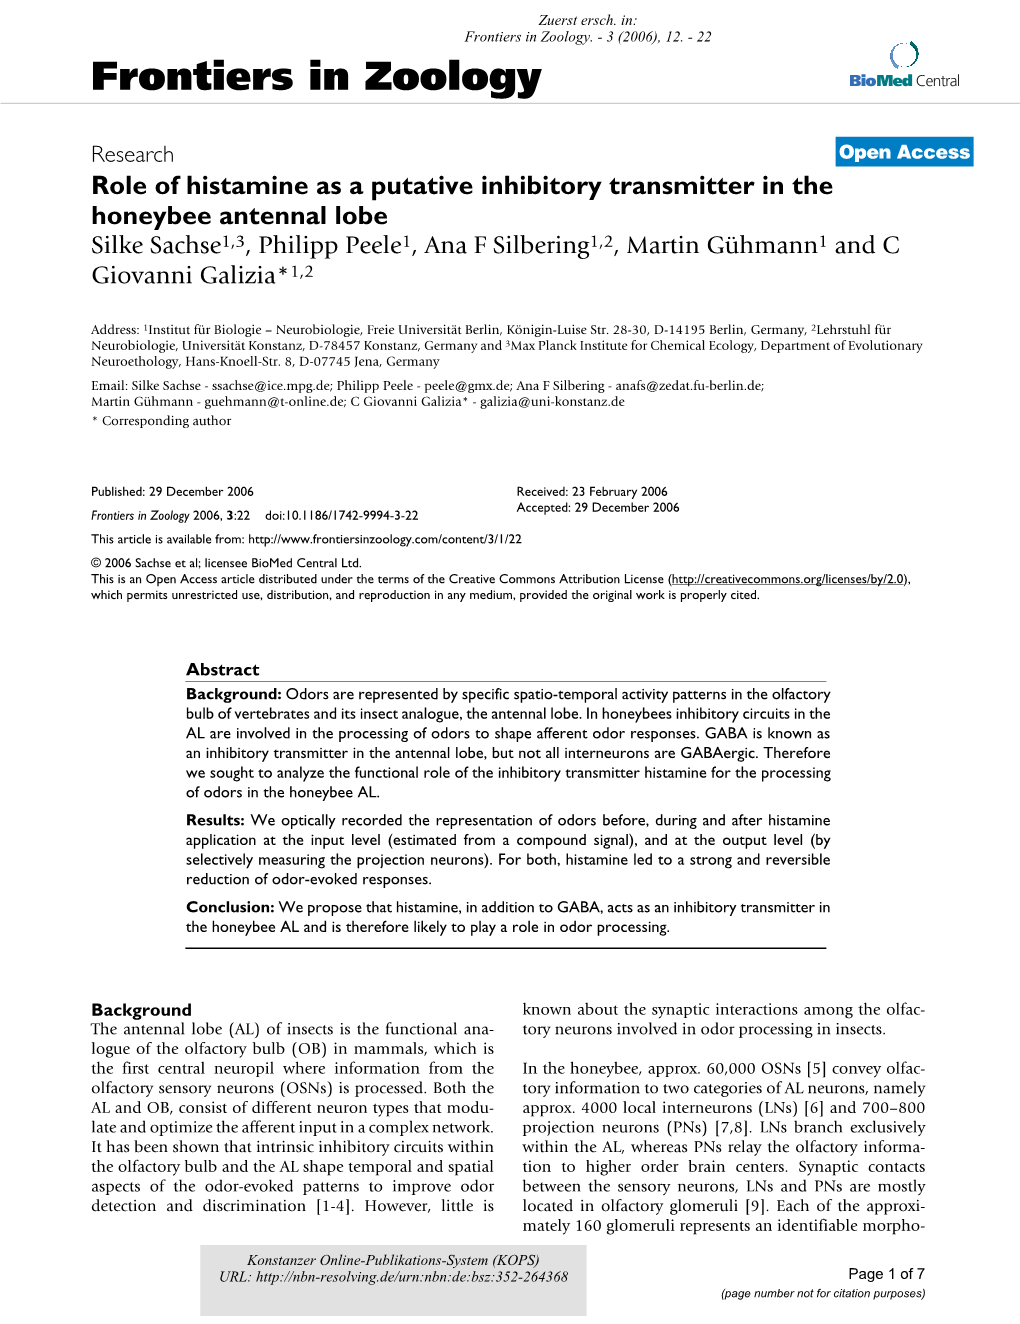 Role of Histamine As a Putative Inhibitory Transmitter in The